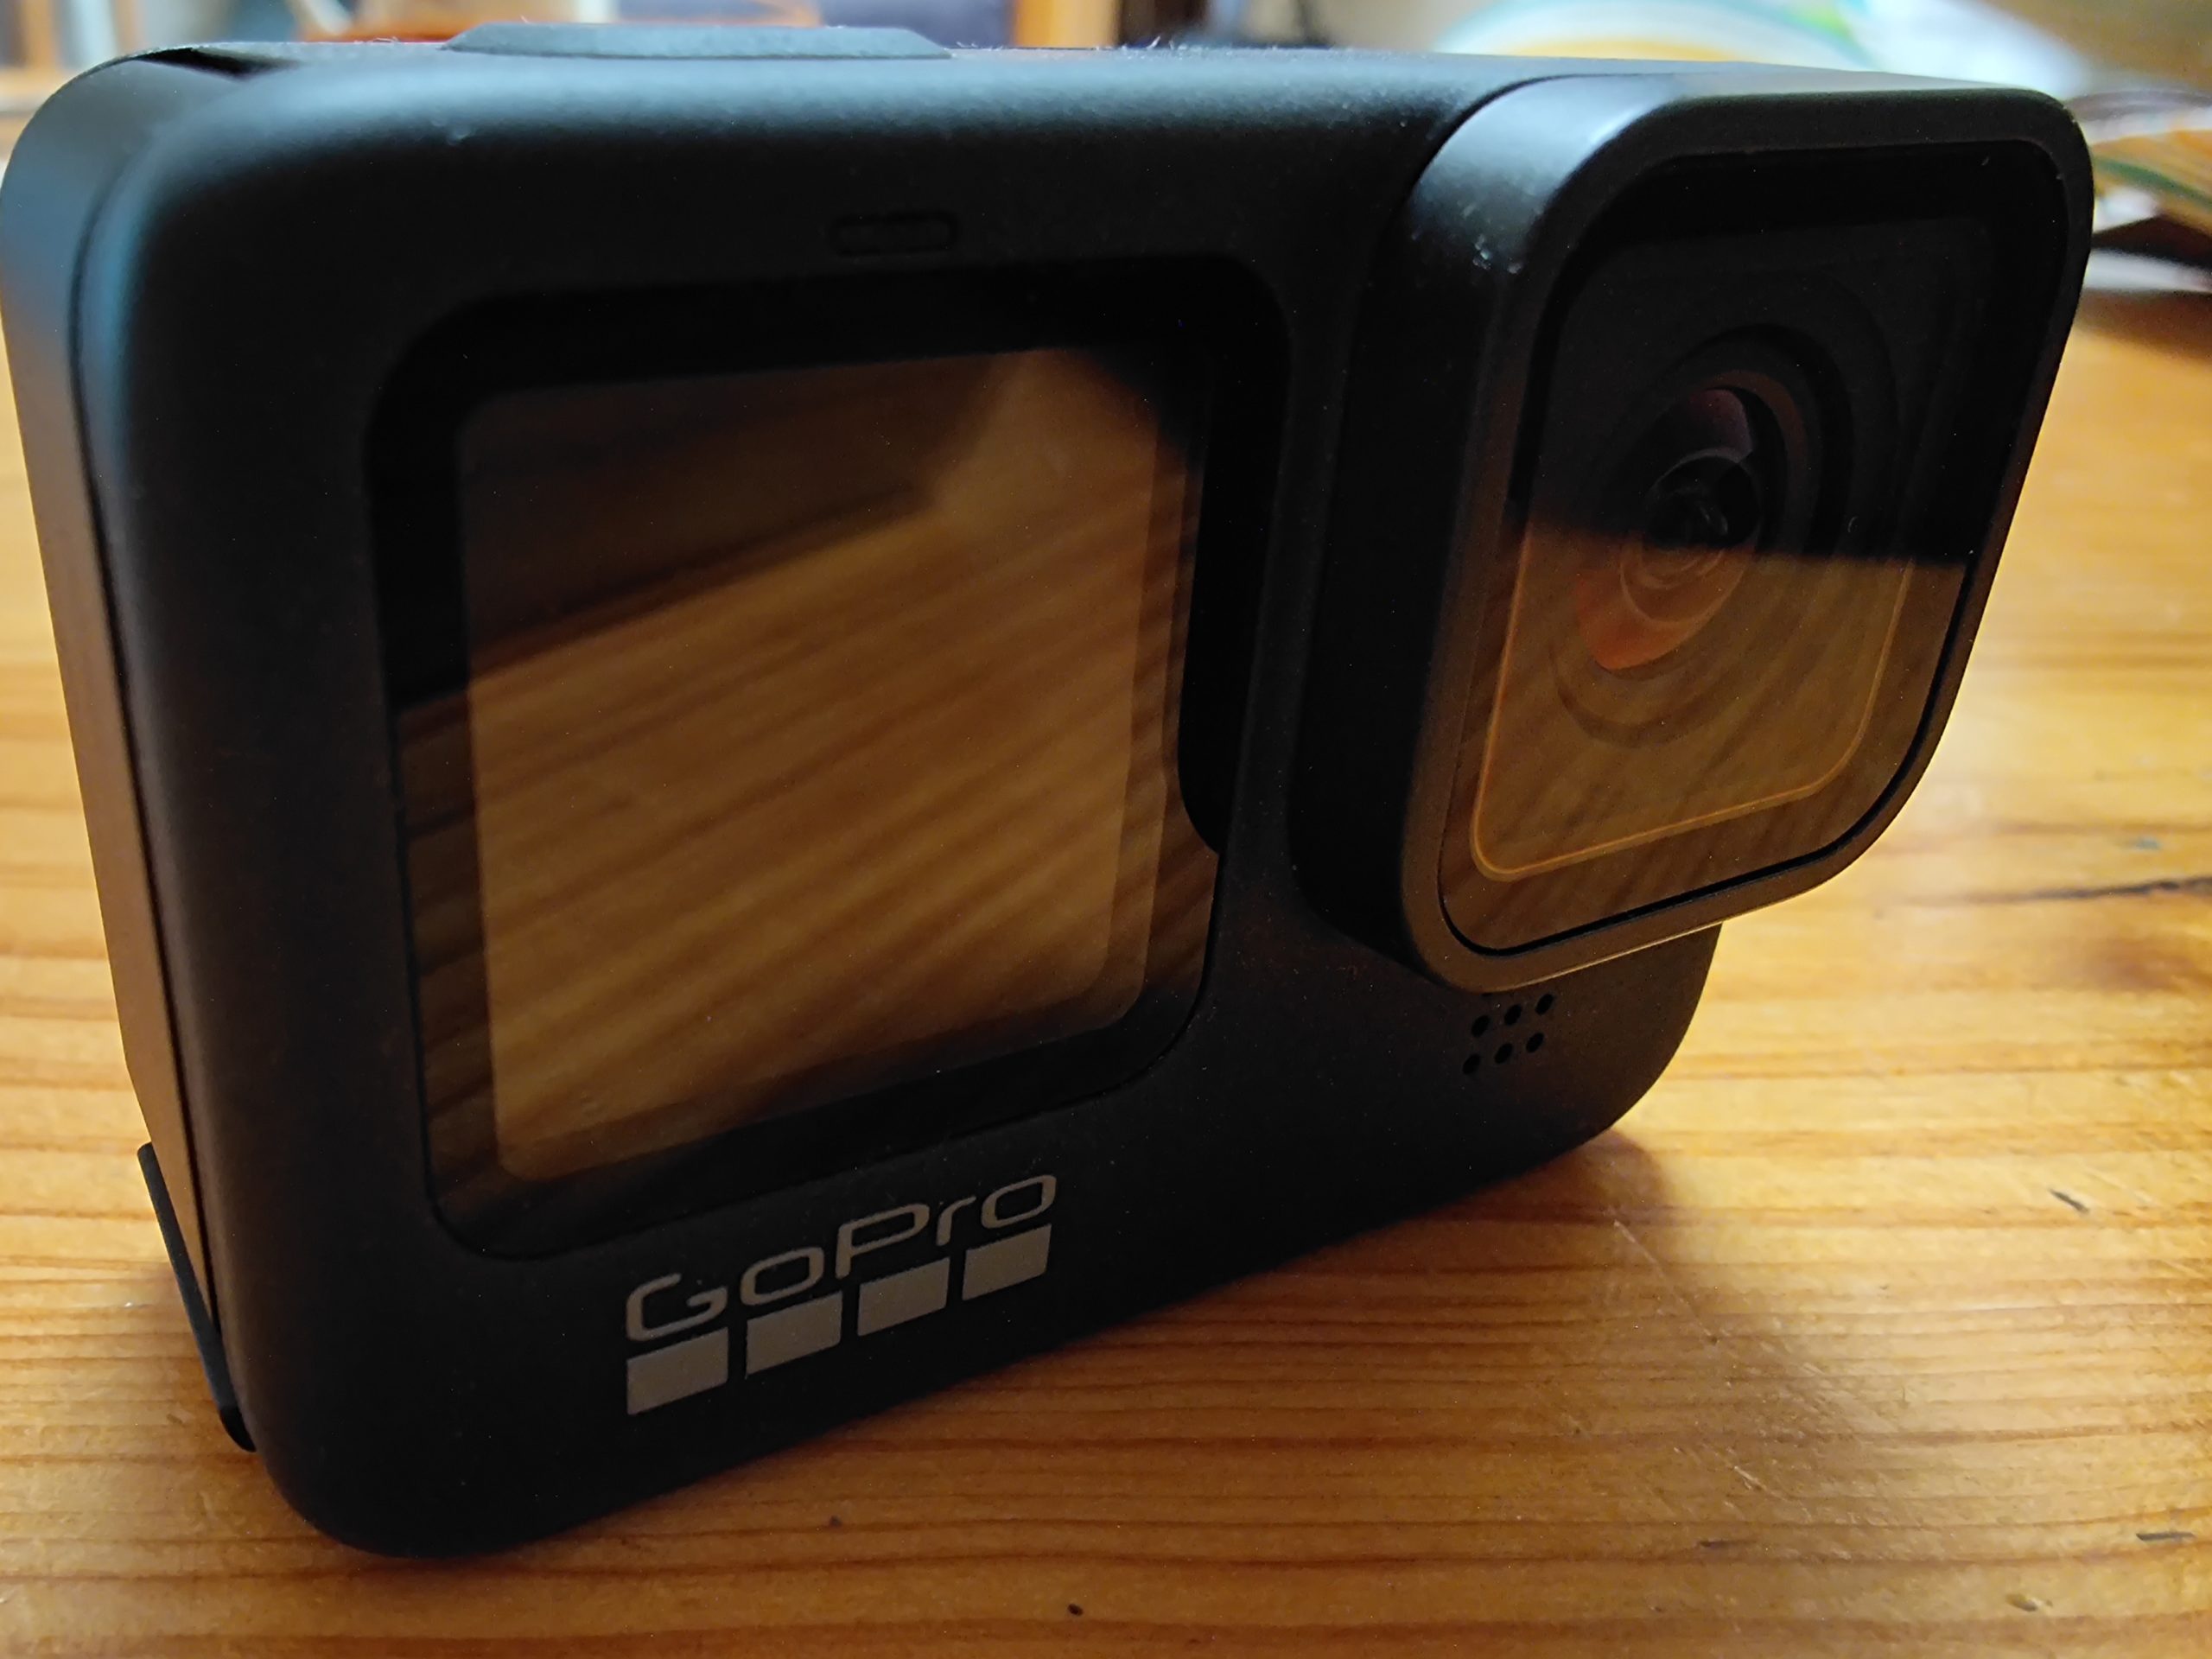 Gopro Hero 9 Black Review An Action Camera Evolution Now Including Vlogging Ausdroid